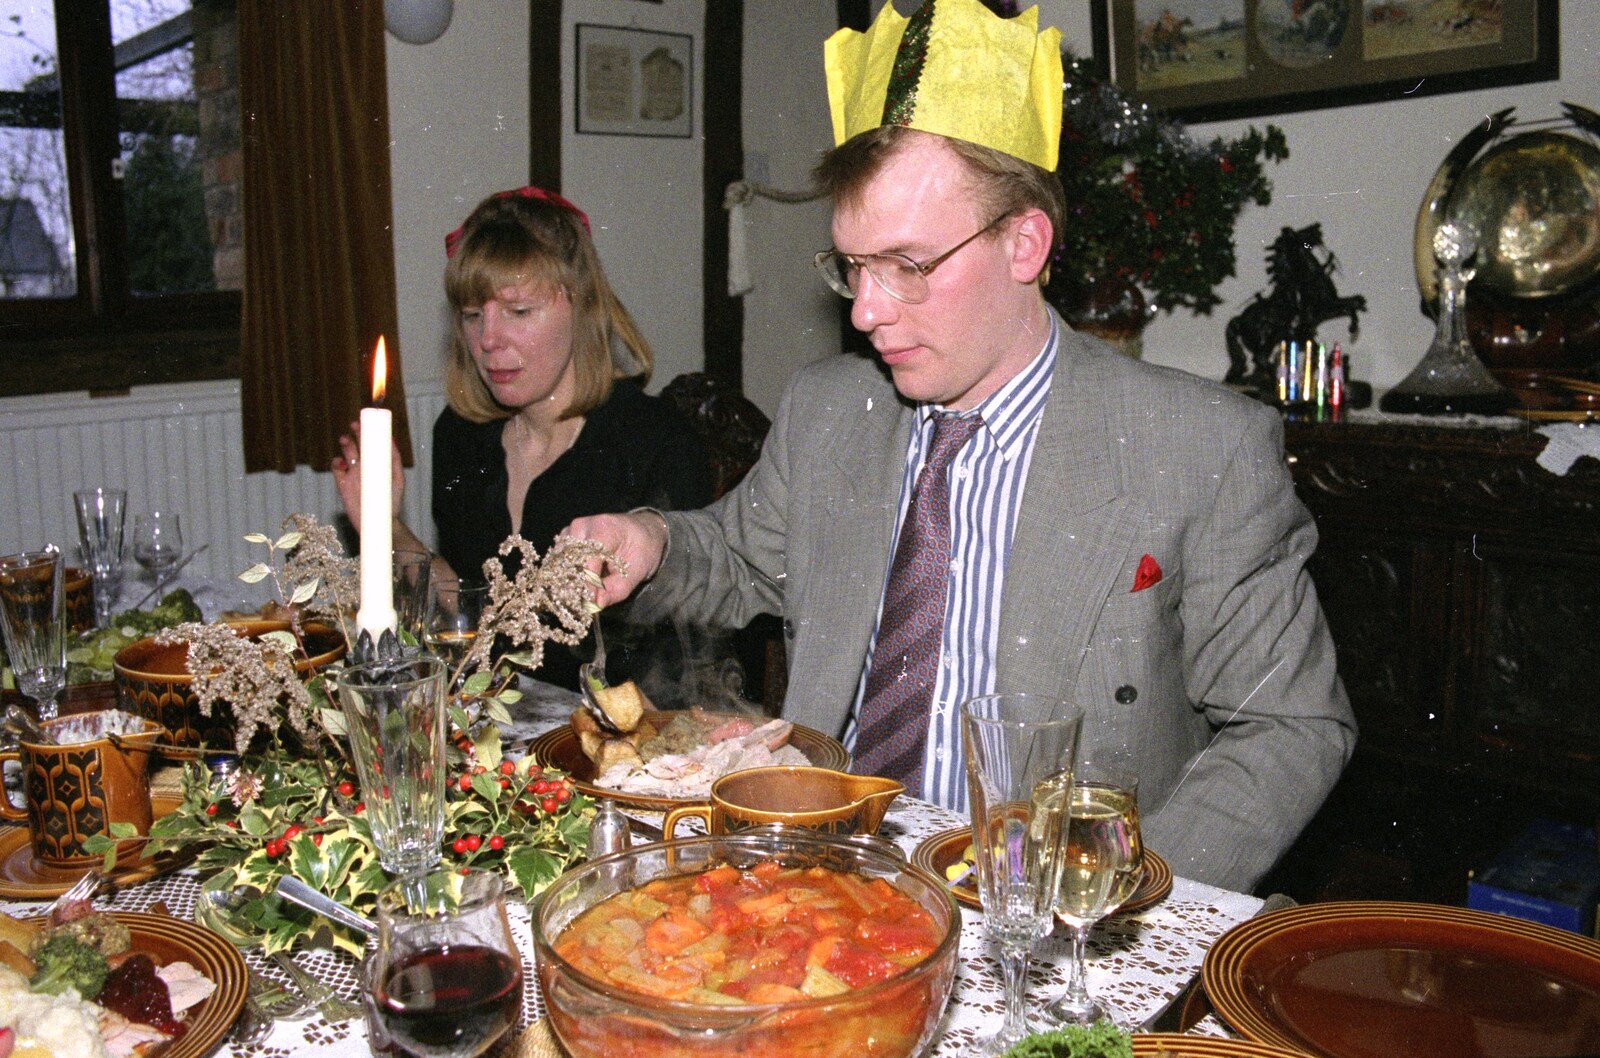 Darren serves up a roast potato from Christmas Dinner with Geoff and Brenda, Stuston, Suffolk - 25th December 1990